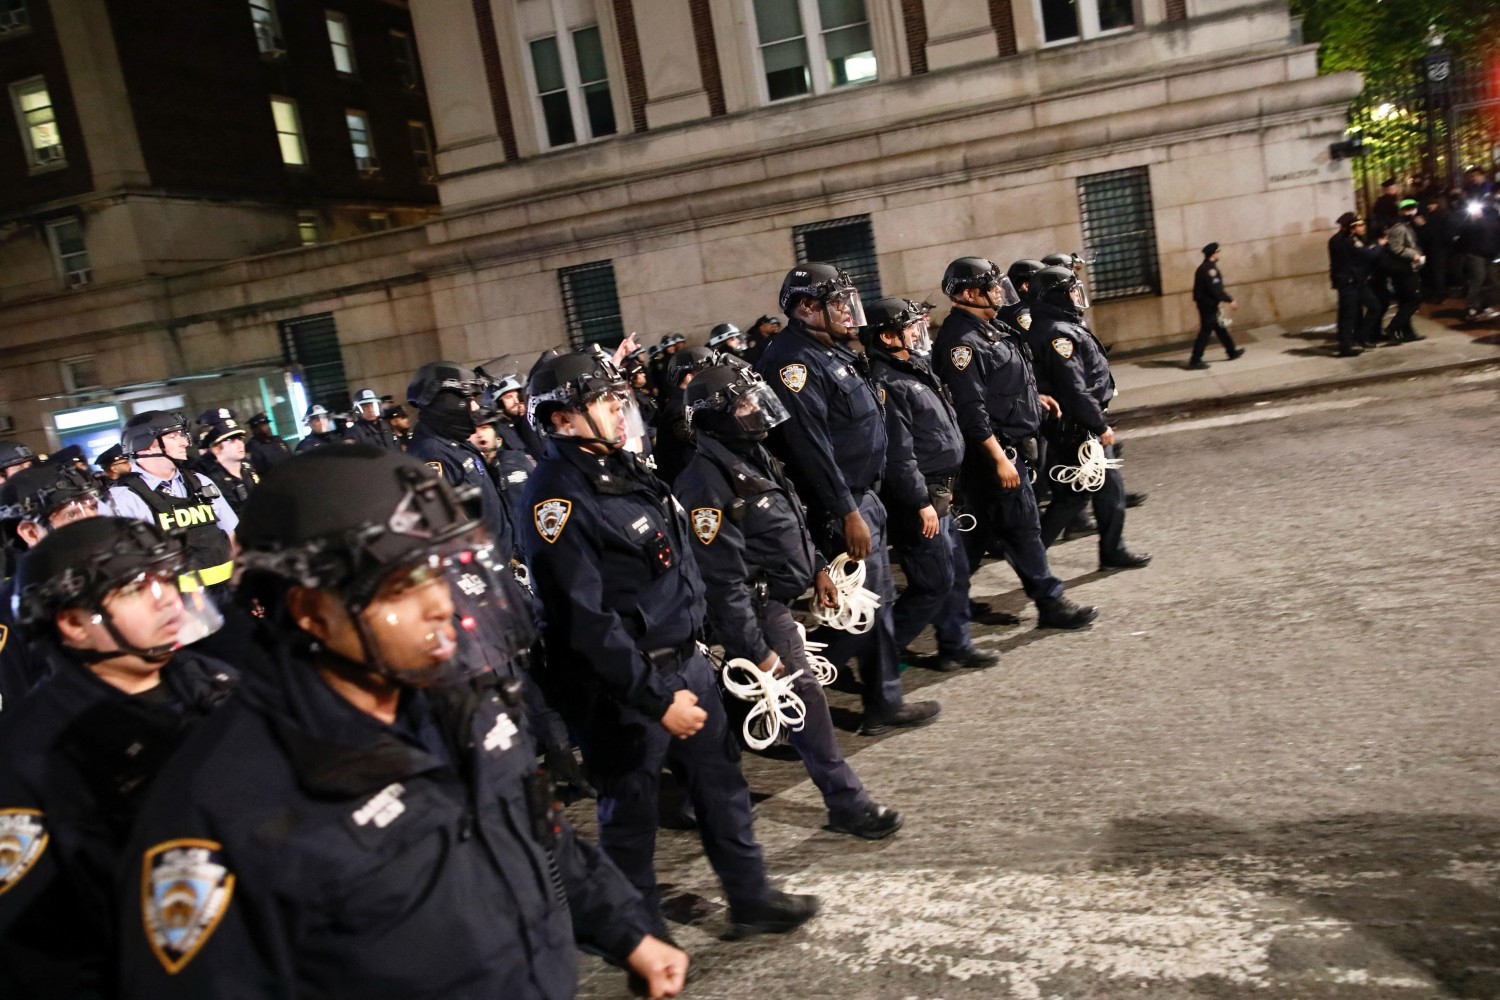 Columbia University’s campus in New York City on Tuesday night. Kena Betancur/AFP via Getty Images